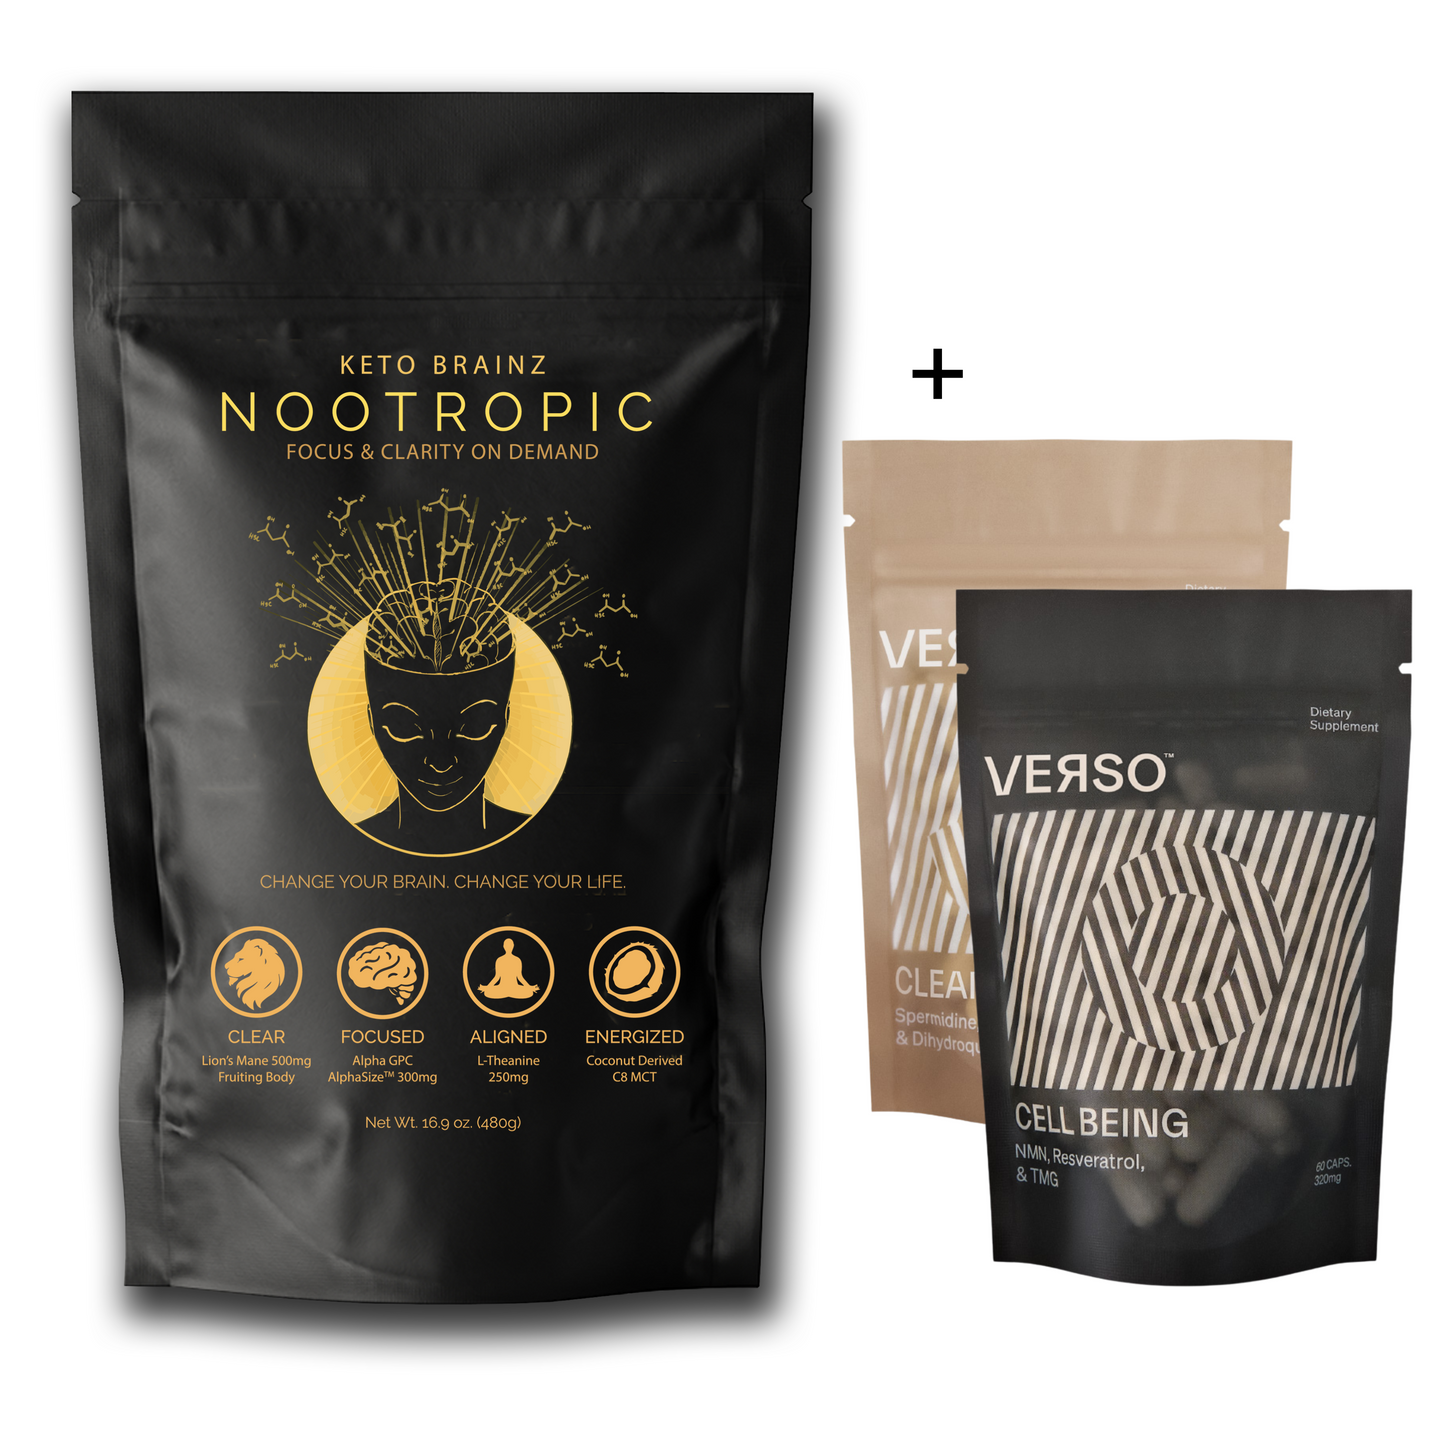 VERSO Clean Being + Cell Being Keto Brainz Nootropic - Save $20!